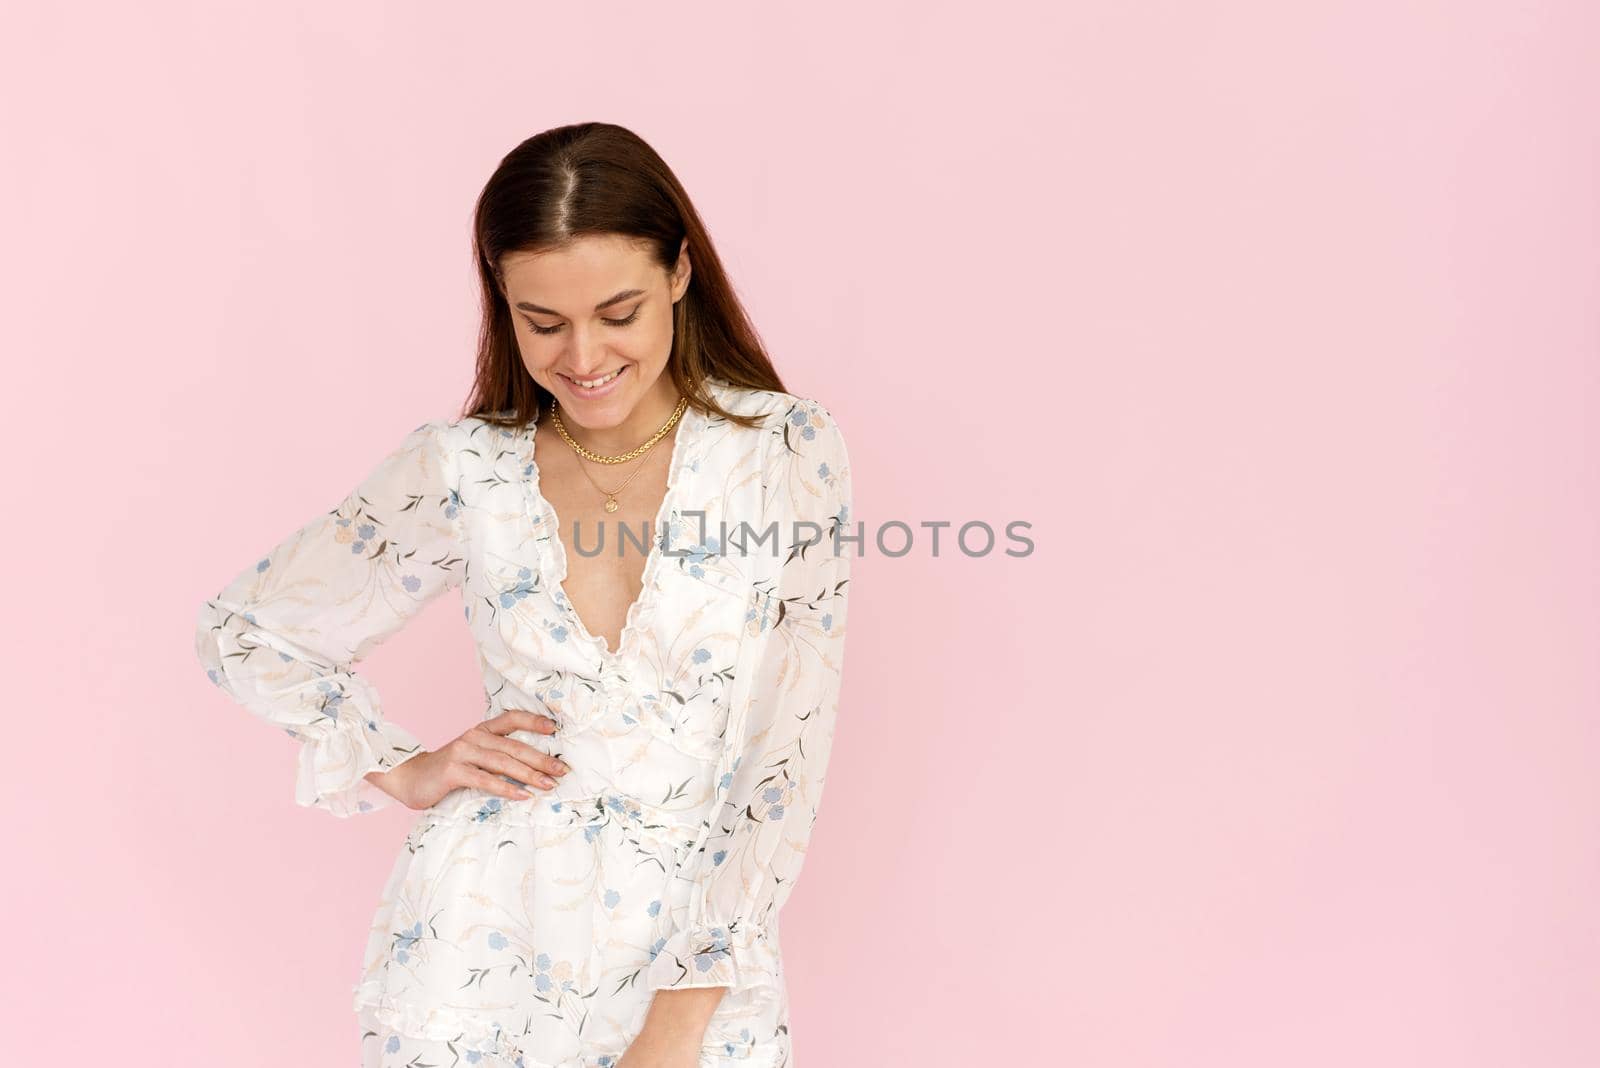 Beautiful smiling stylish woman in a white dress in a romantic mood posing on a pink background, summer fashion style